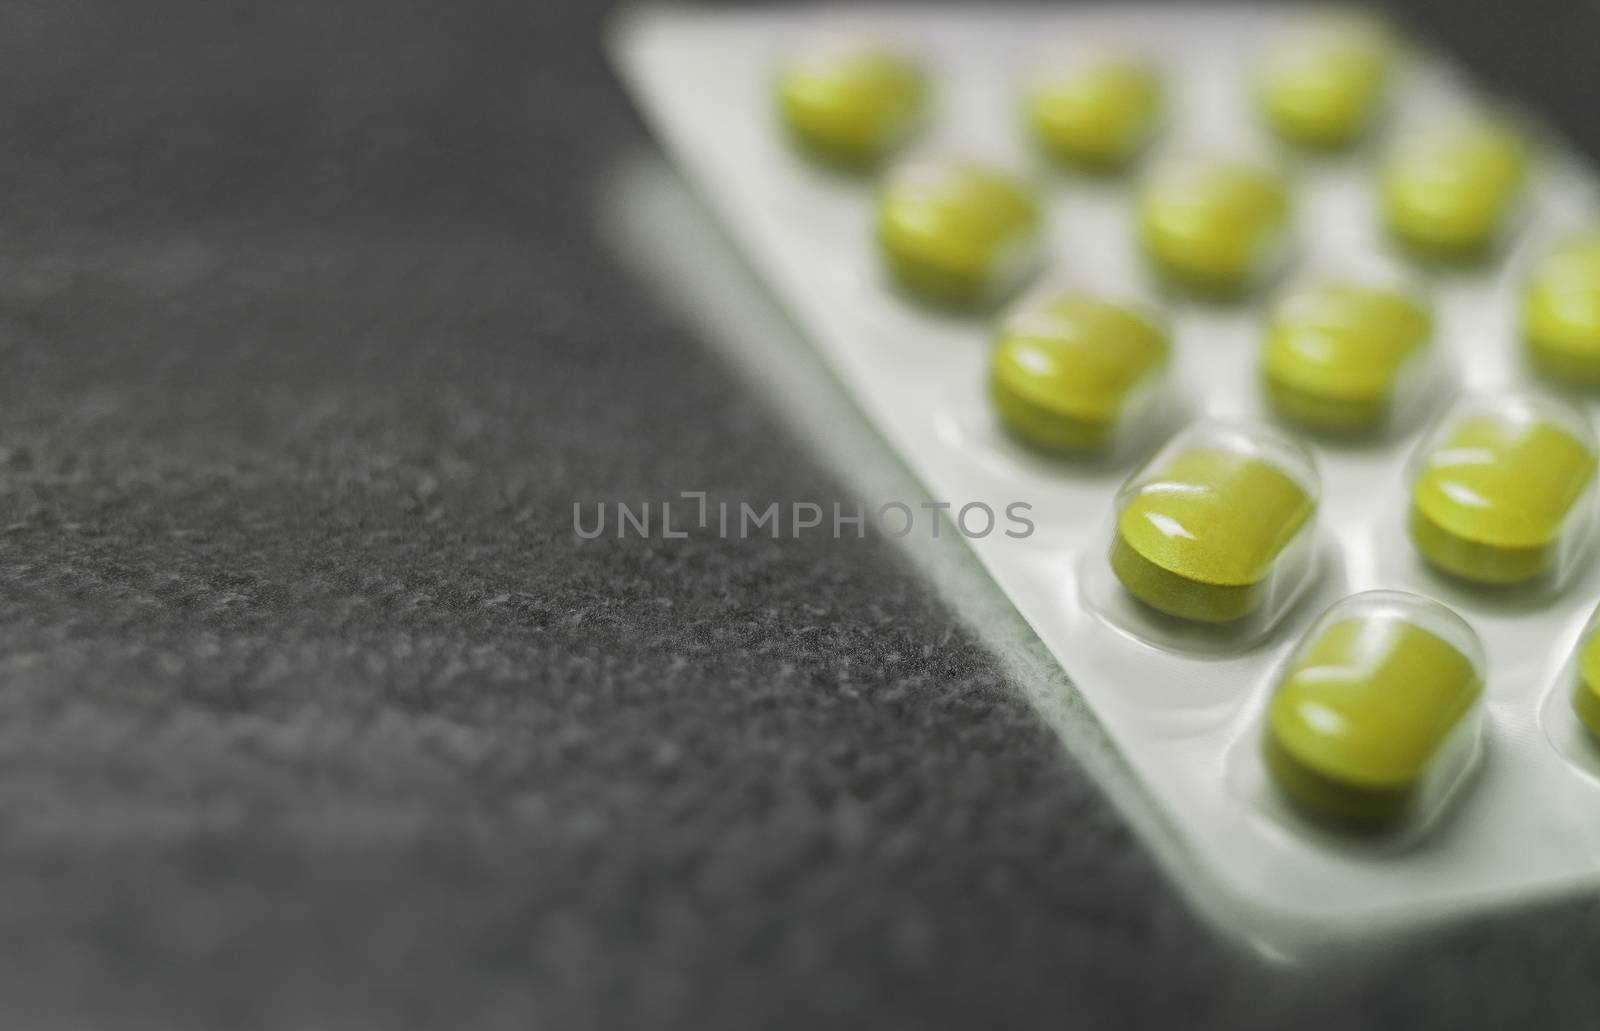 Blister pack of Yellow medicine pills Close up by gemenacom